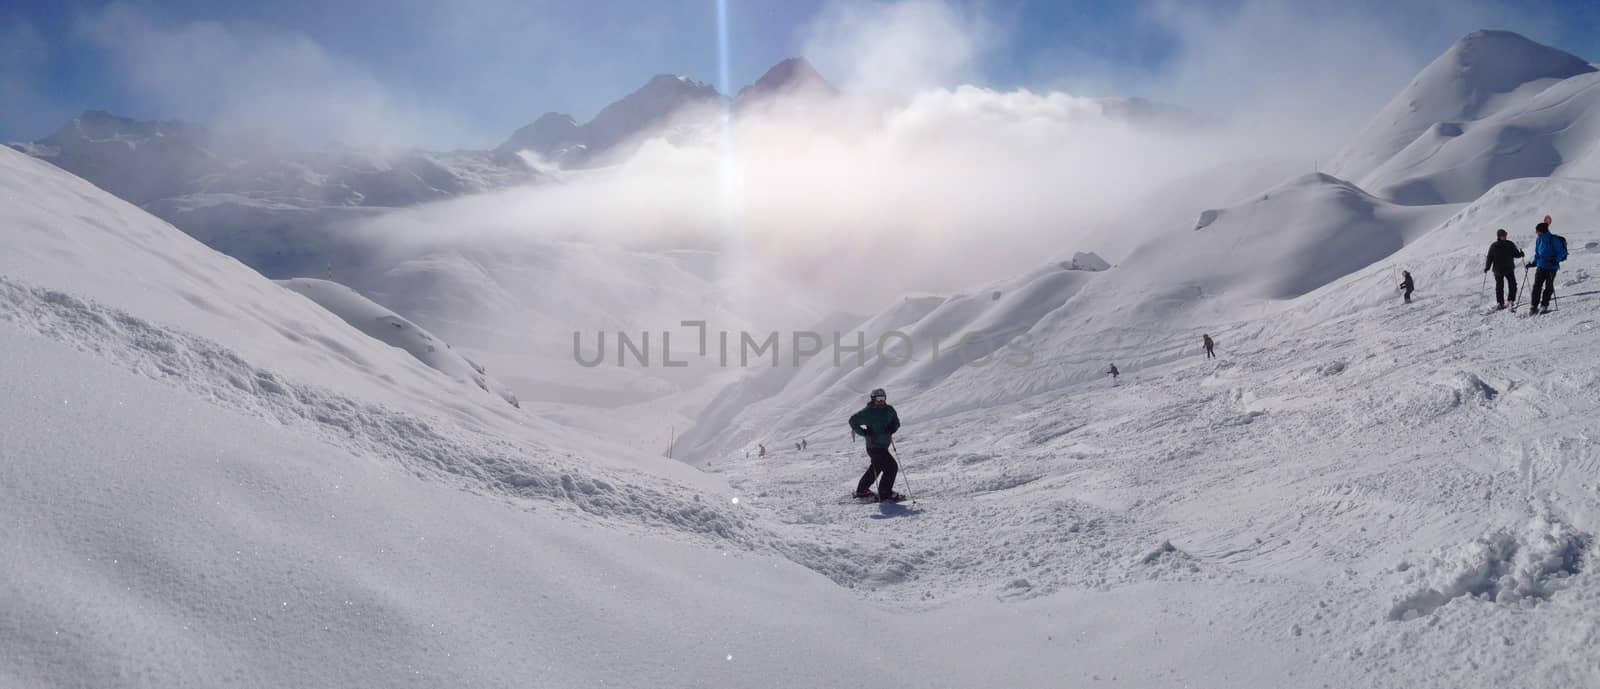 A skier on the piste in front of beautiful mountains